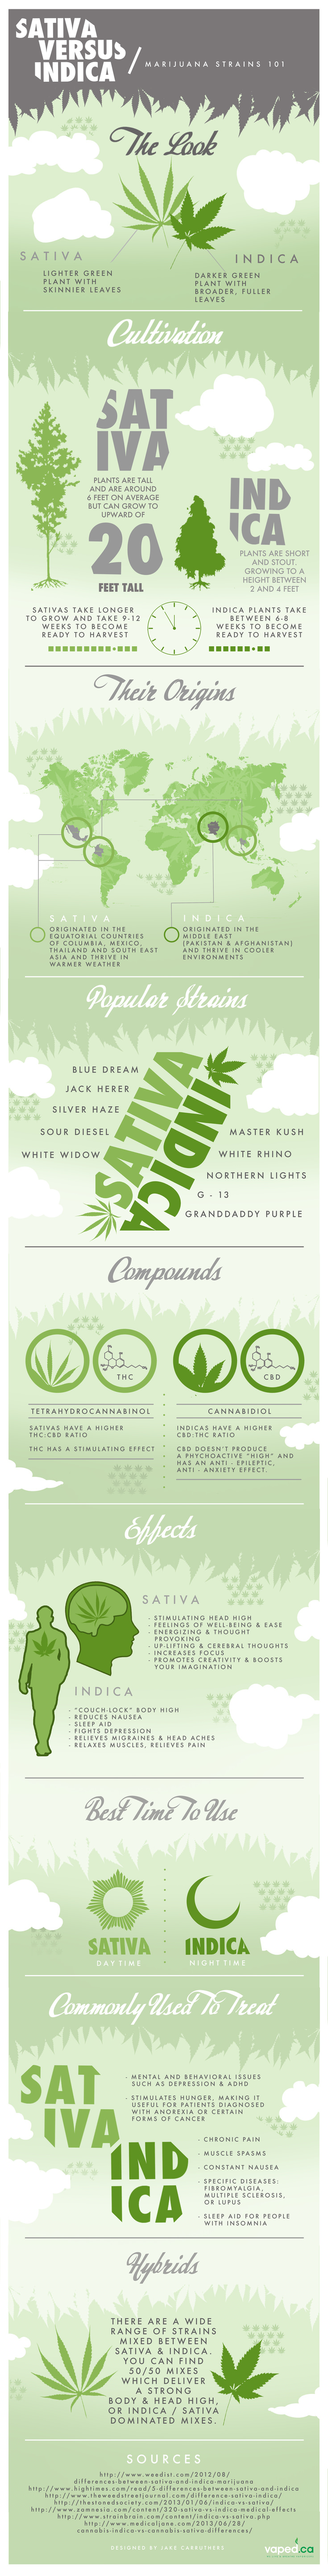 Sativa vs Indica: The Two Major Strains of Cannabis